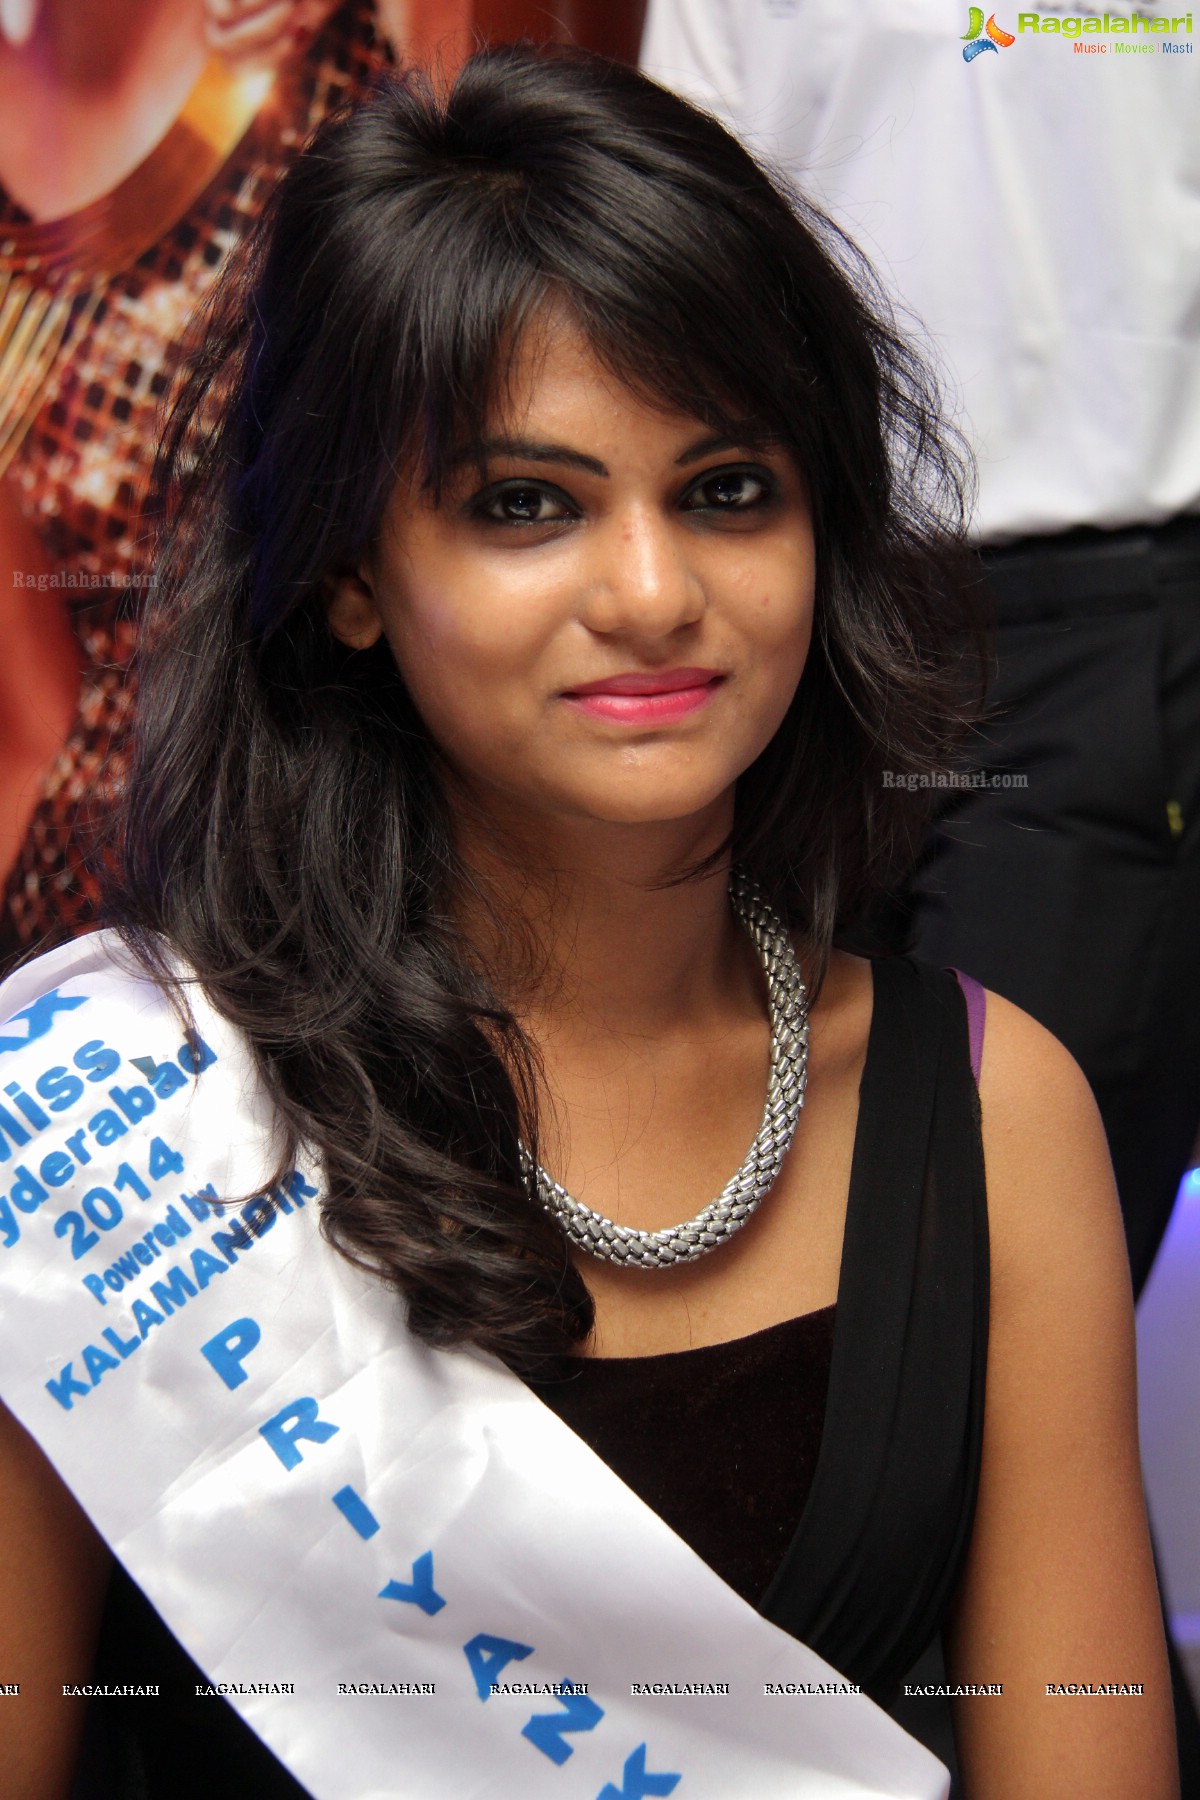 Miss Hyderabad Finalists 2014 at News Cafe, Hyderabad